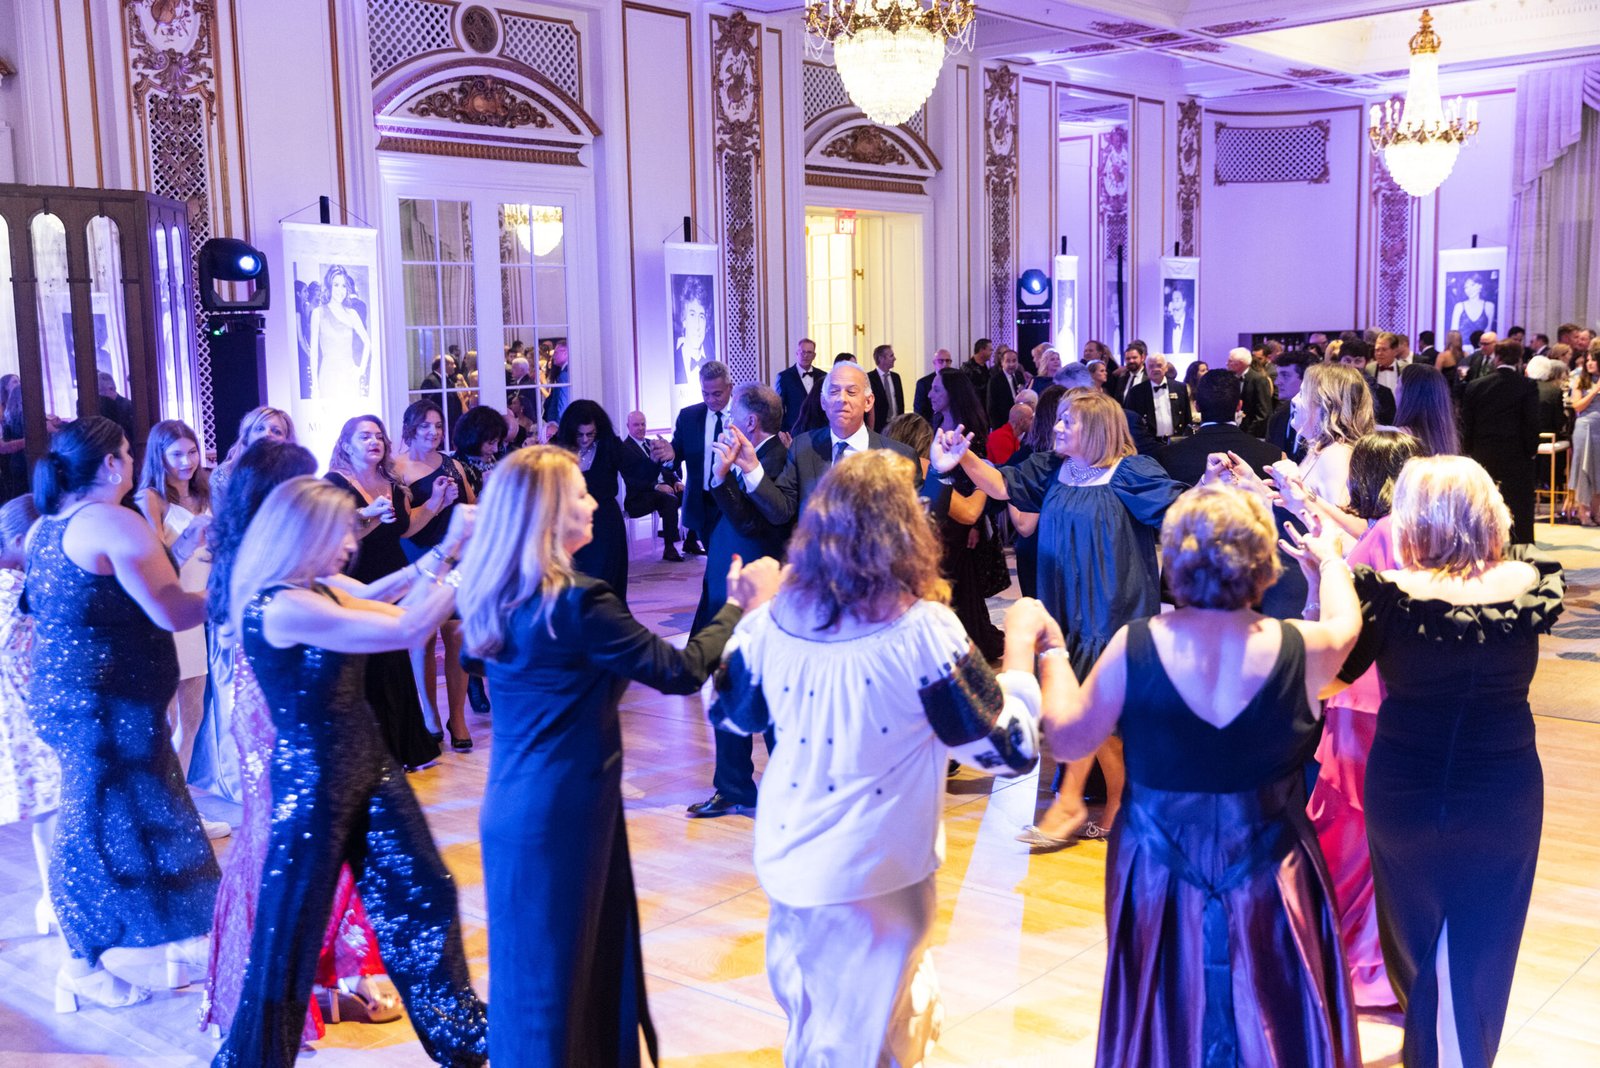 The 13th HELLENIC CHARITY BALL  WELCOMED 400 GUESTS AT DINNER DANCE AND AWARDS SHOW HONORING FOUR PROMINENT GREEK & GREEK-AMERICANS FROM ARTS & ENTERTAINMENT AND SPORTS © Copyright PLPG GLOBAL MEDIA 2023